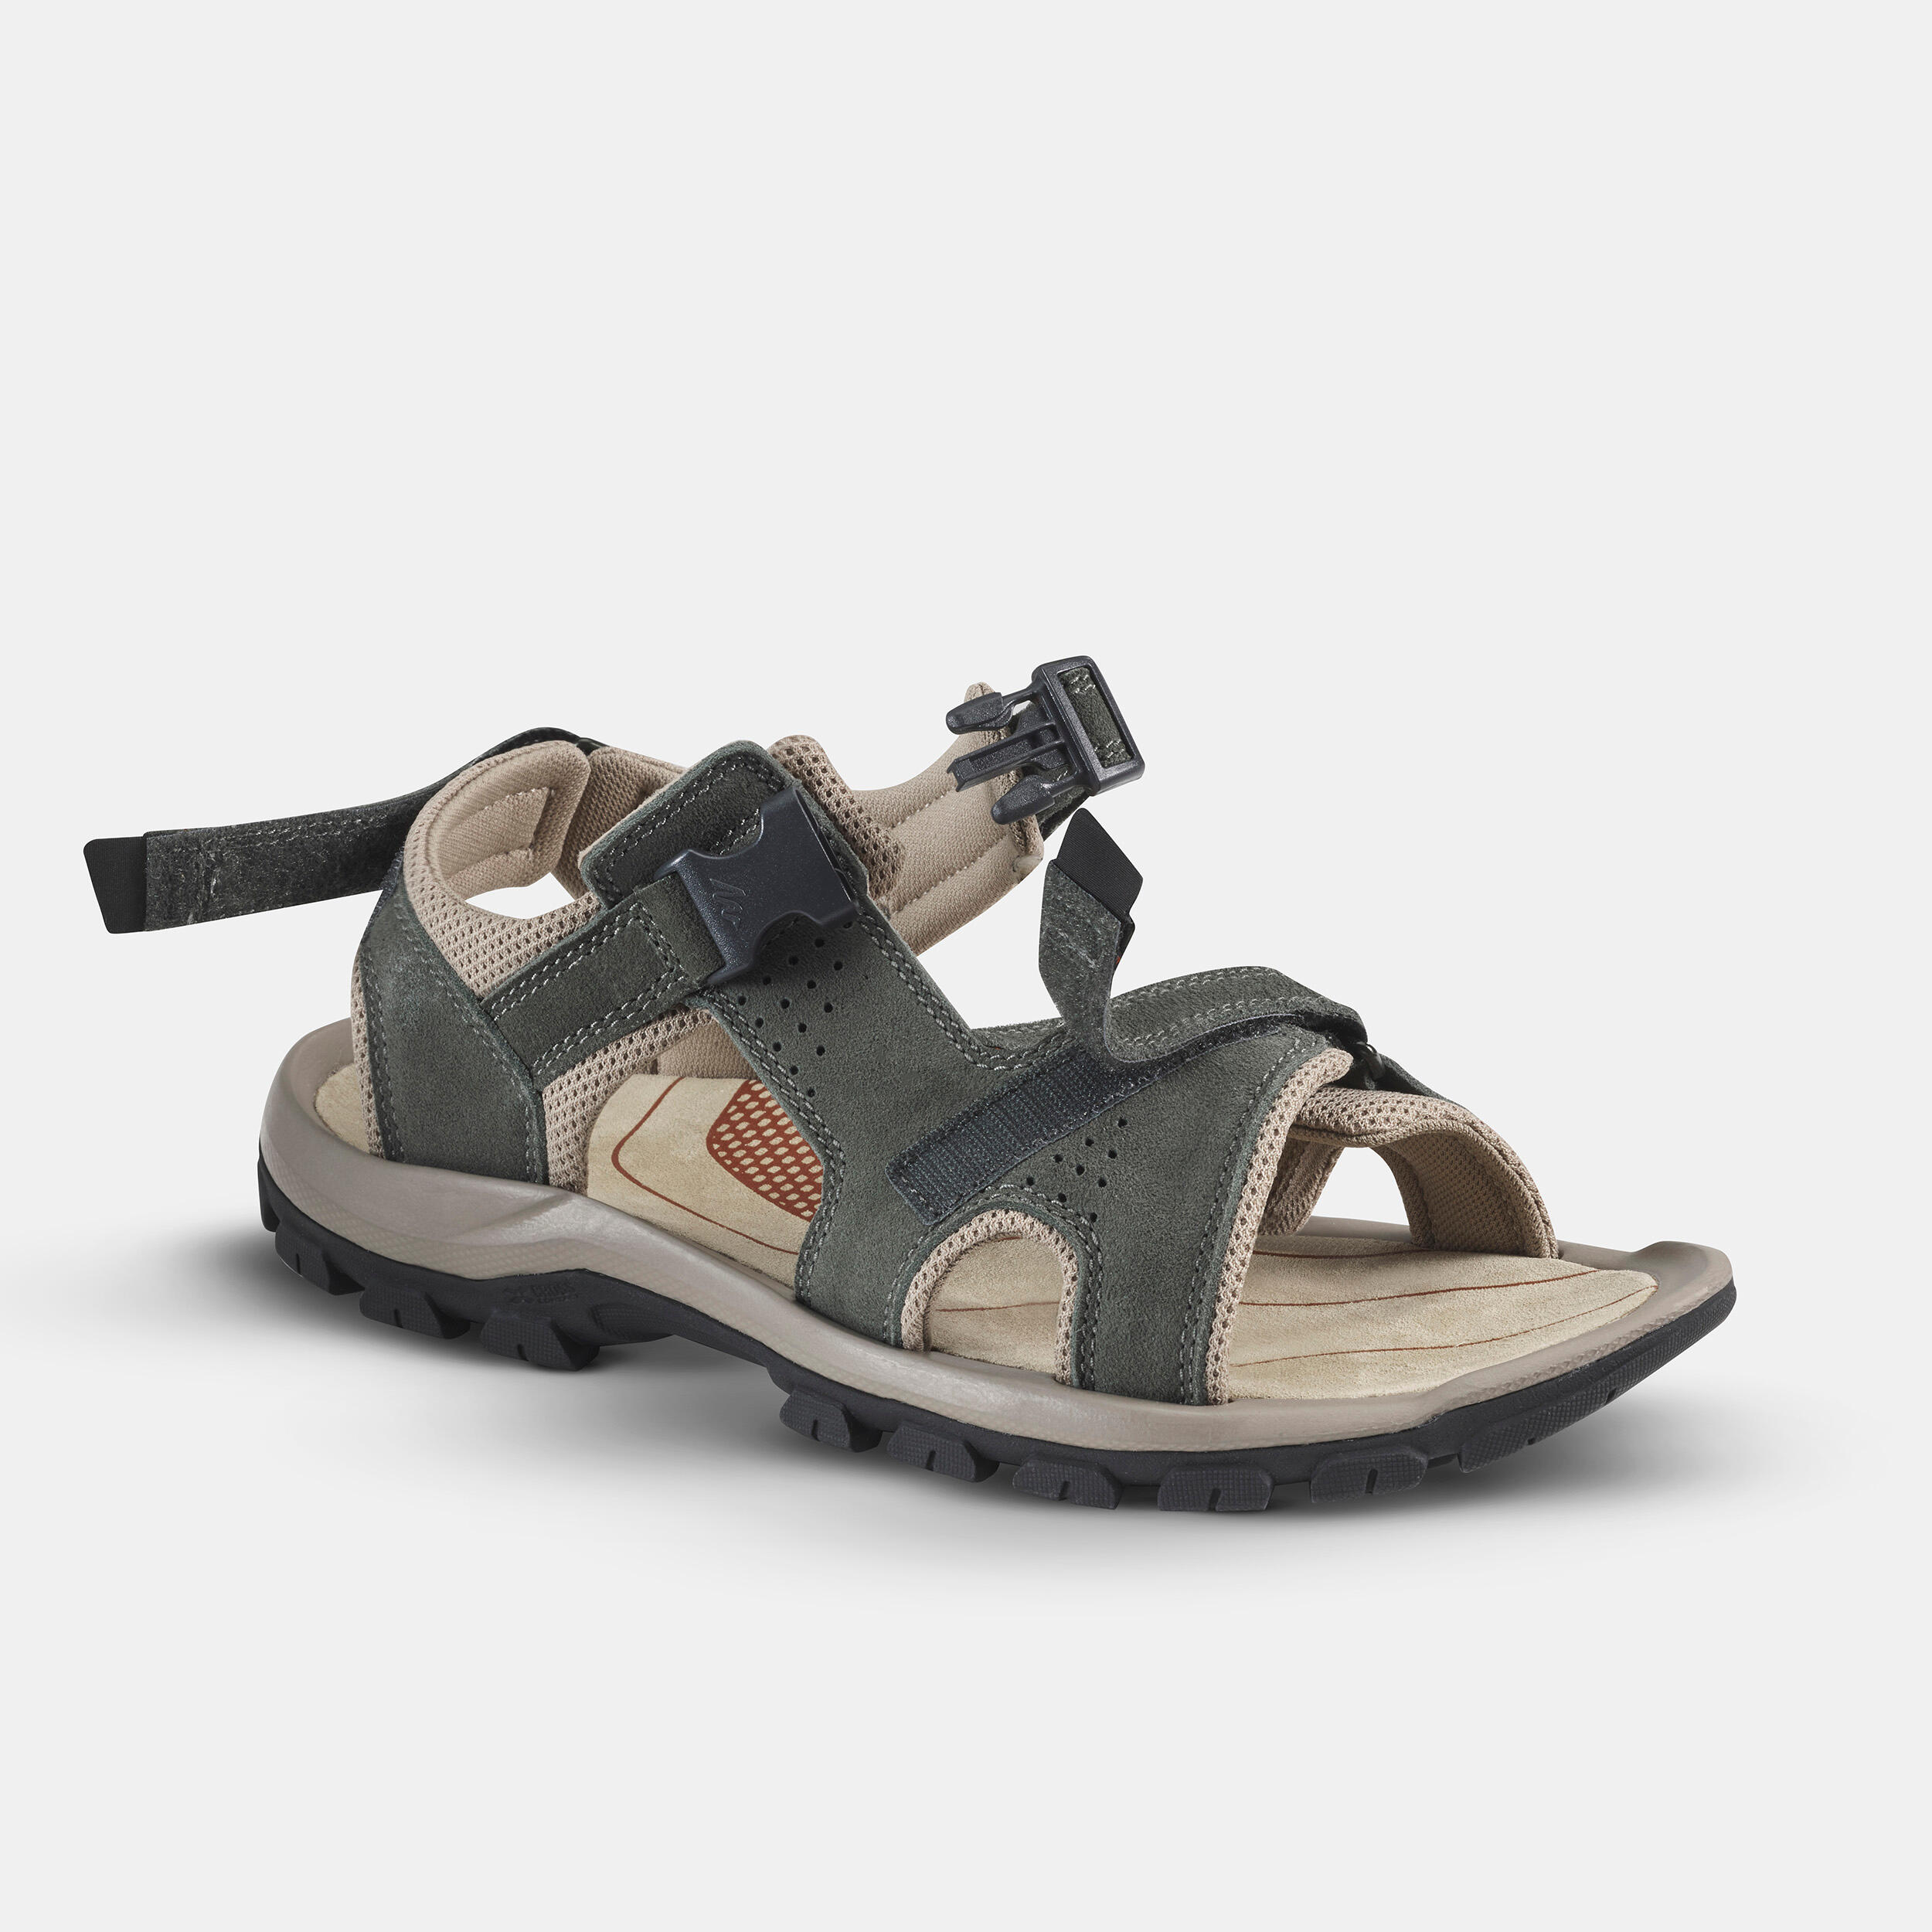 Men's Leather Hiking Sandals NH500 6/9